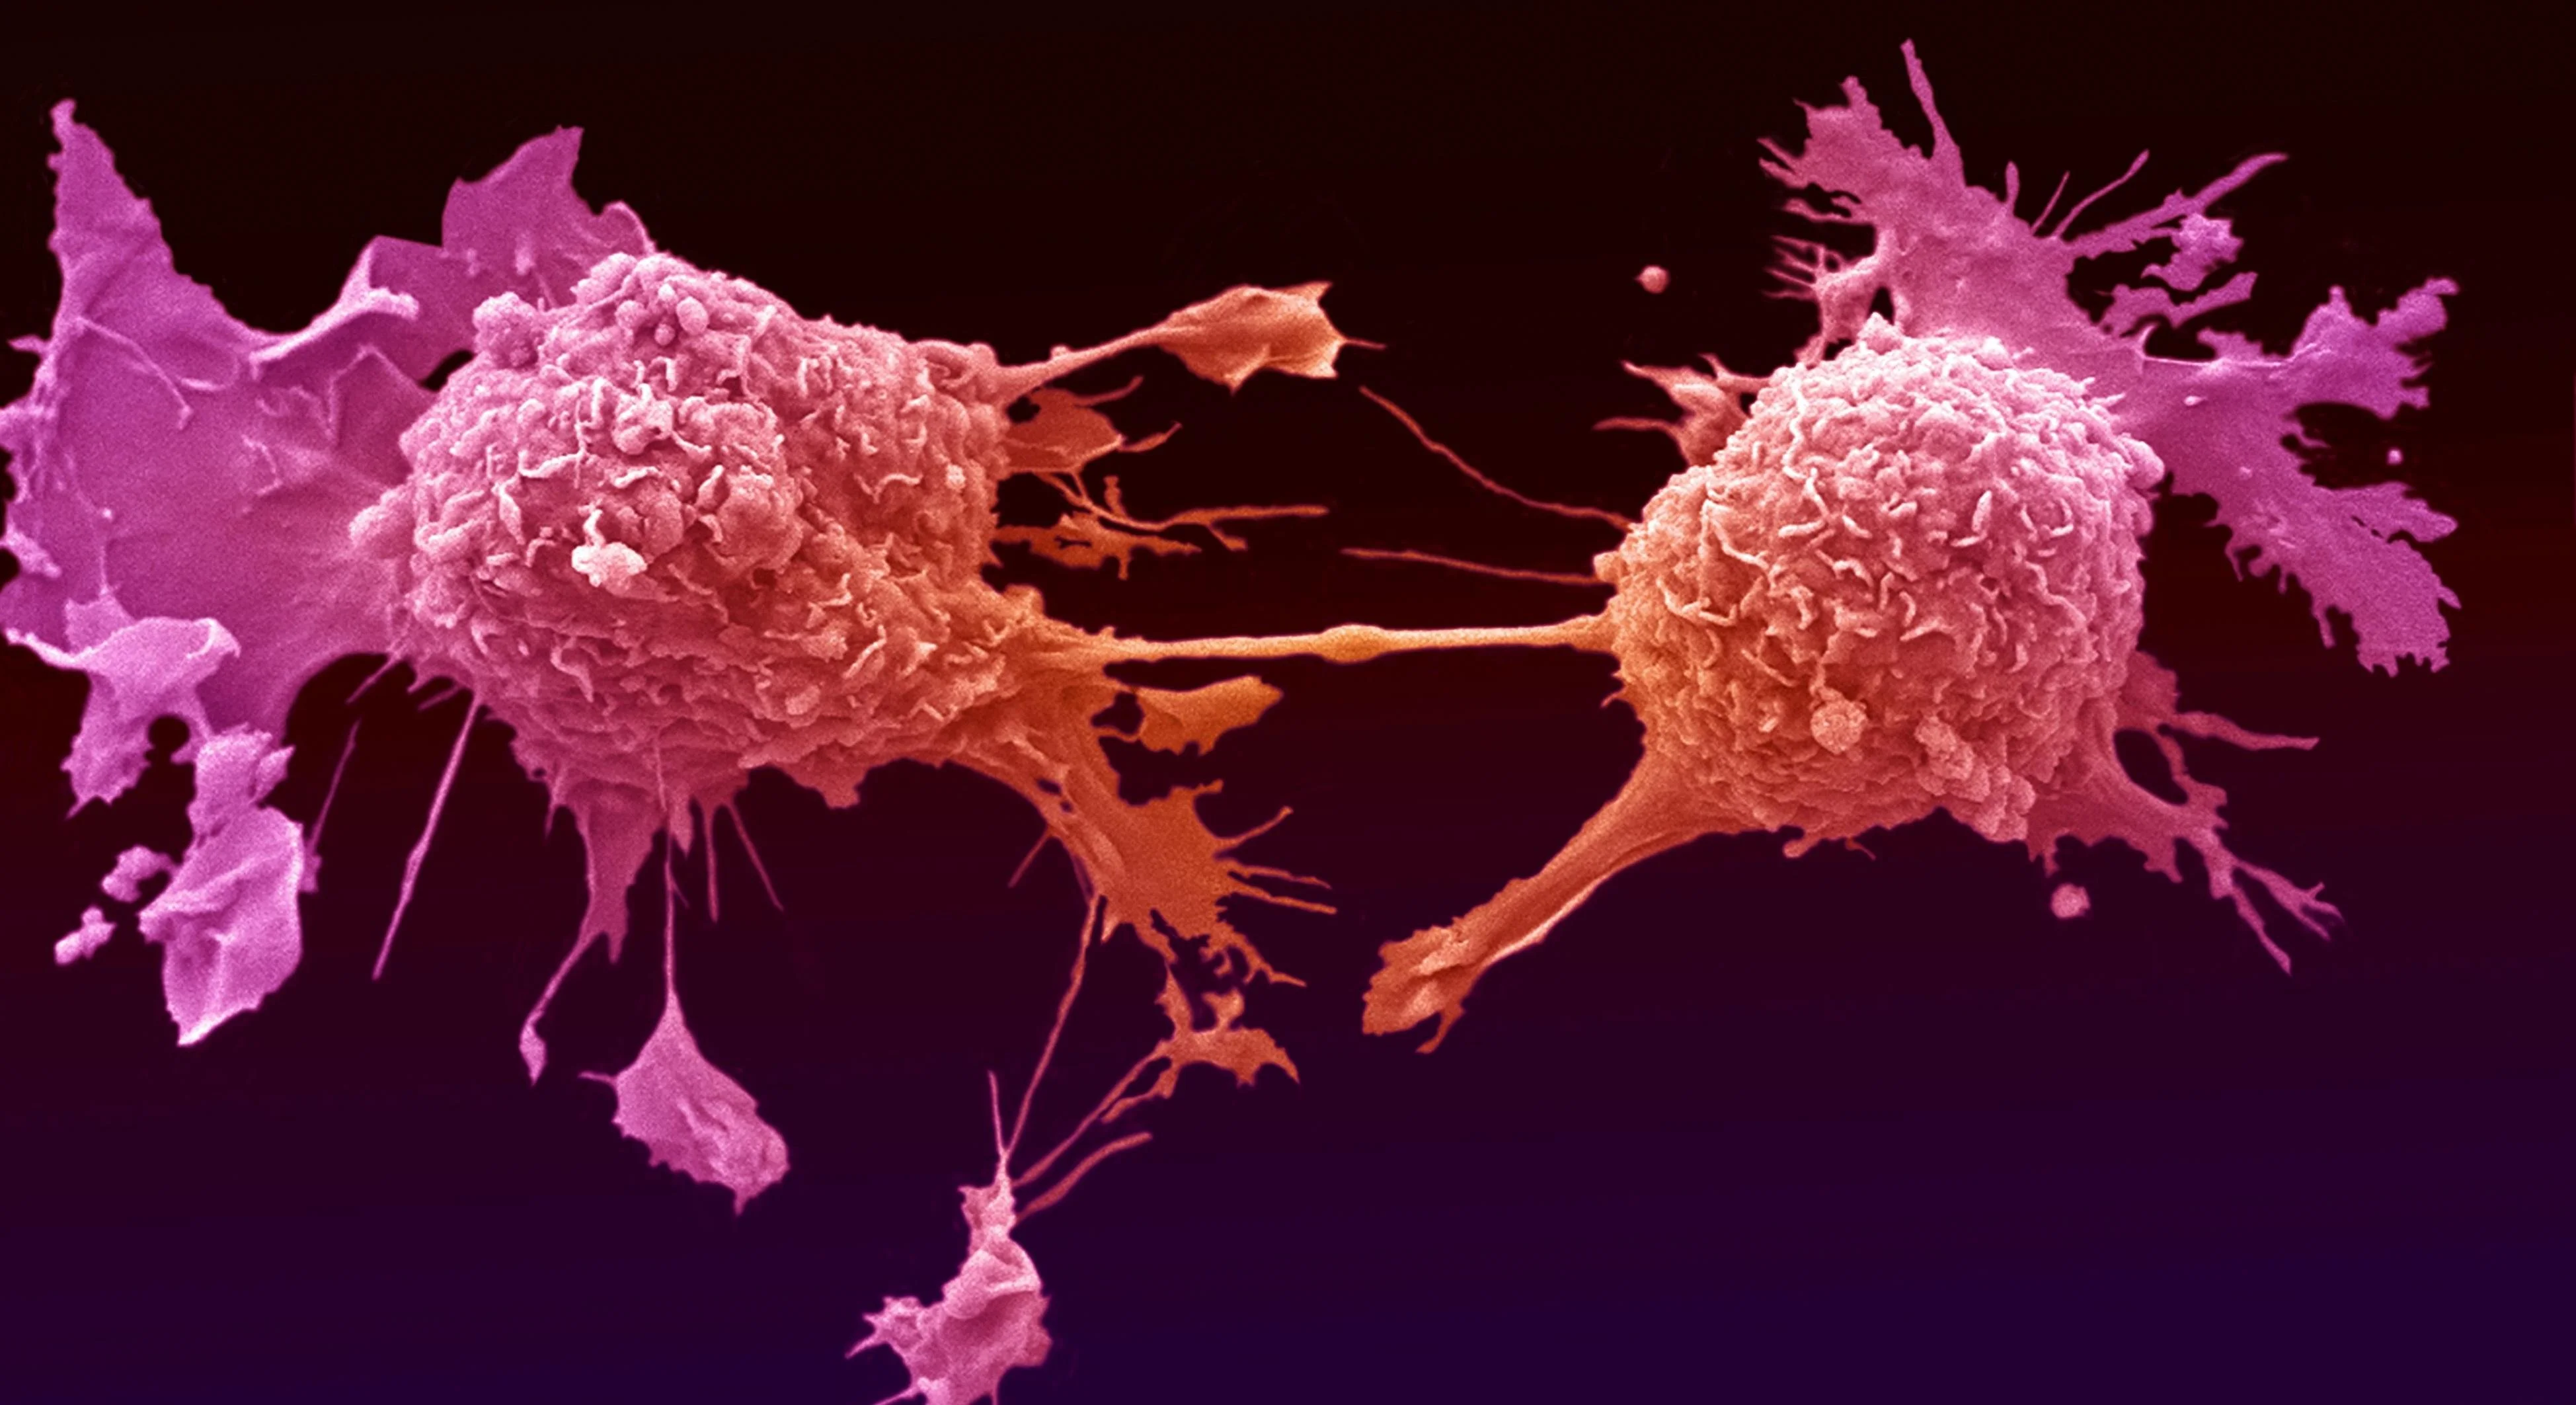 Lung cancer cells dividing. Credit: Anne Weston, Francis Crick Institute. CC BY-NC